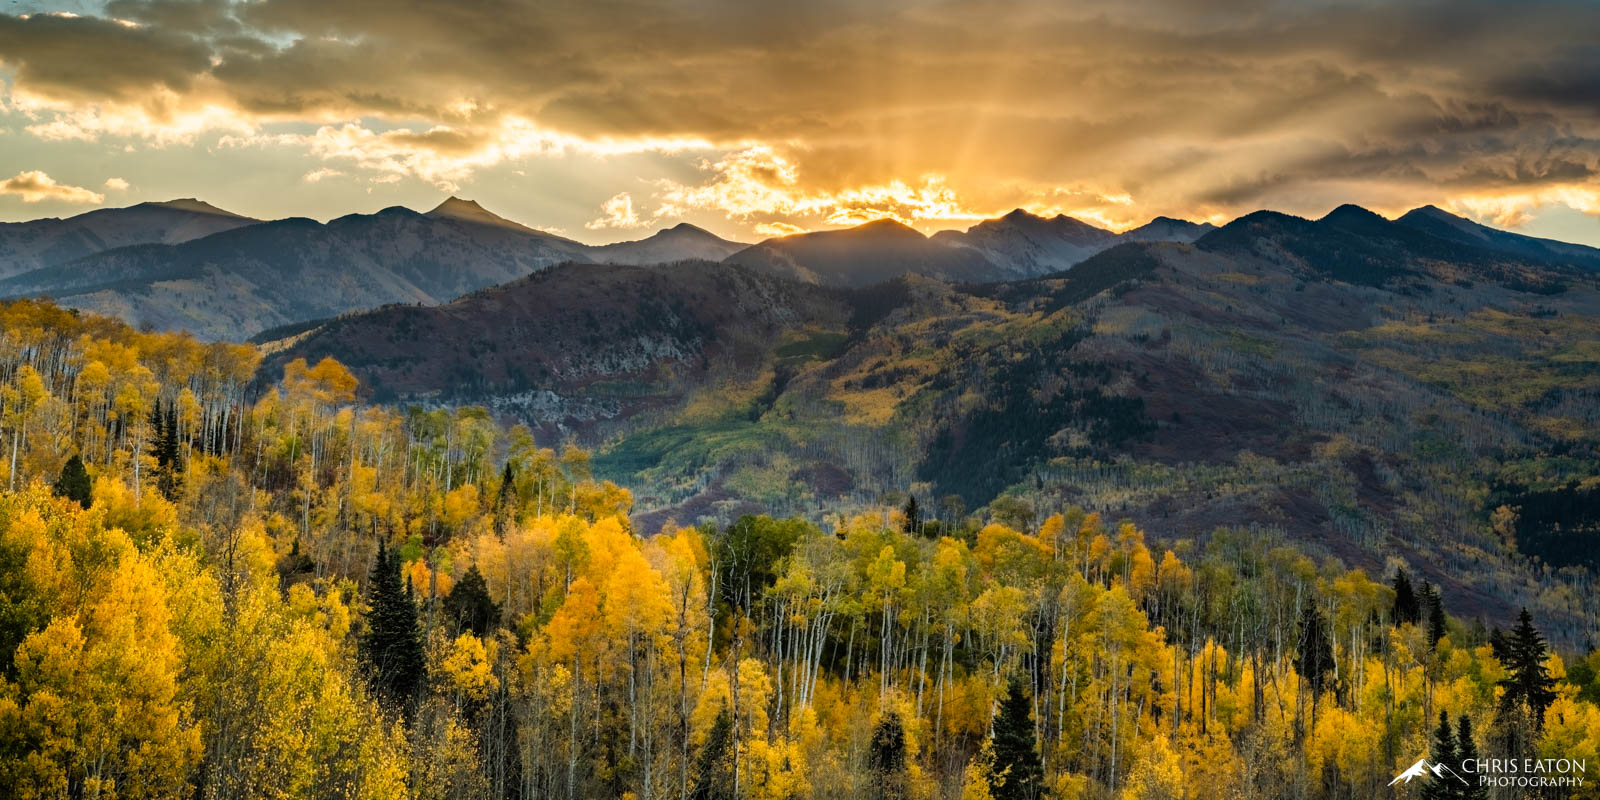 Early morning sunlight bathes the clouds over the Elk Mountains; the reflected light illuminates the stands of Quaking Aspen (...